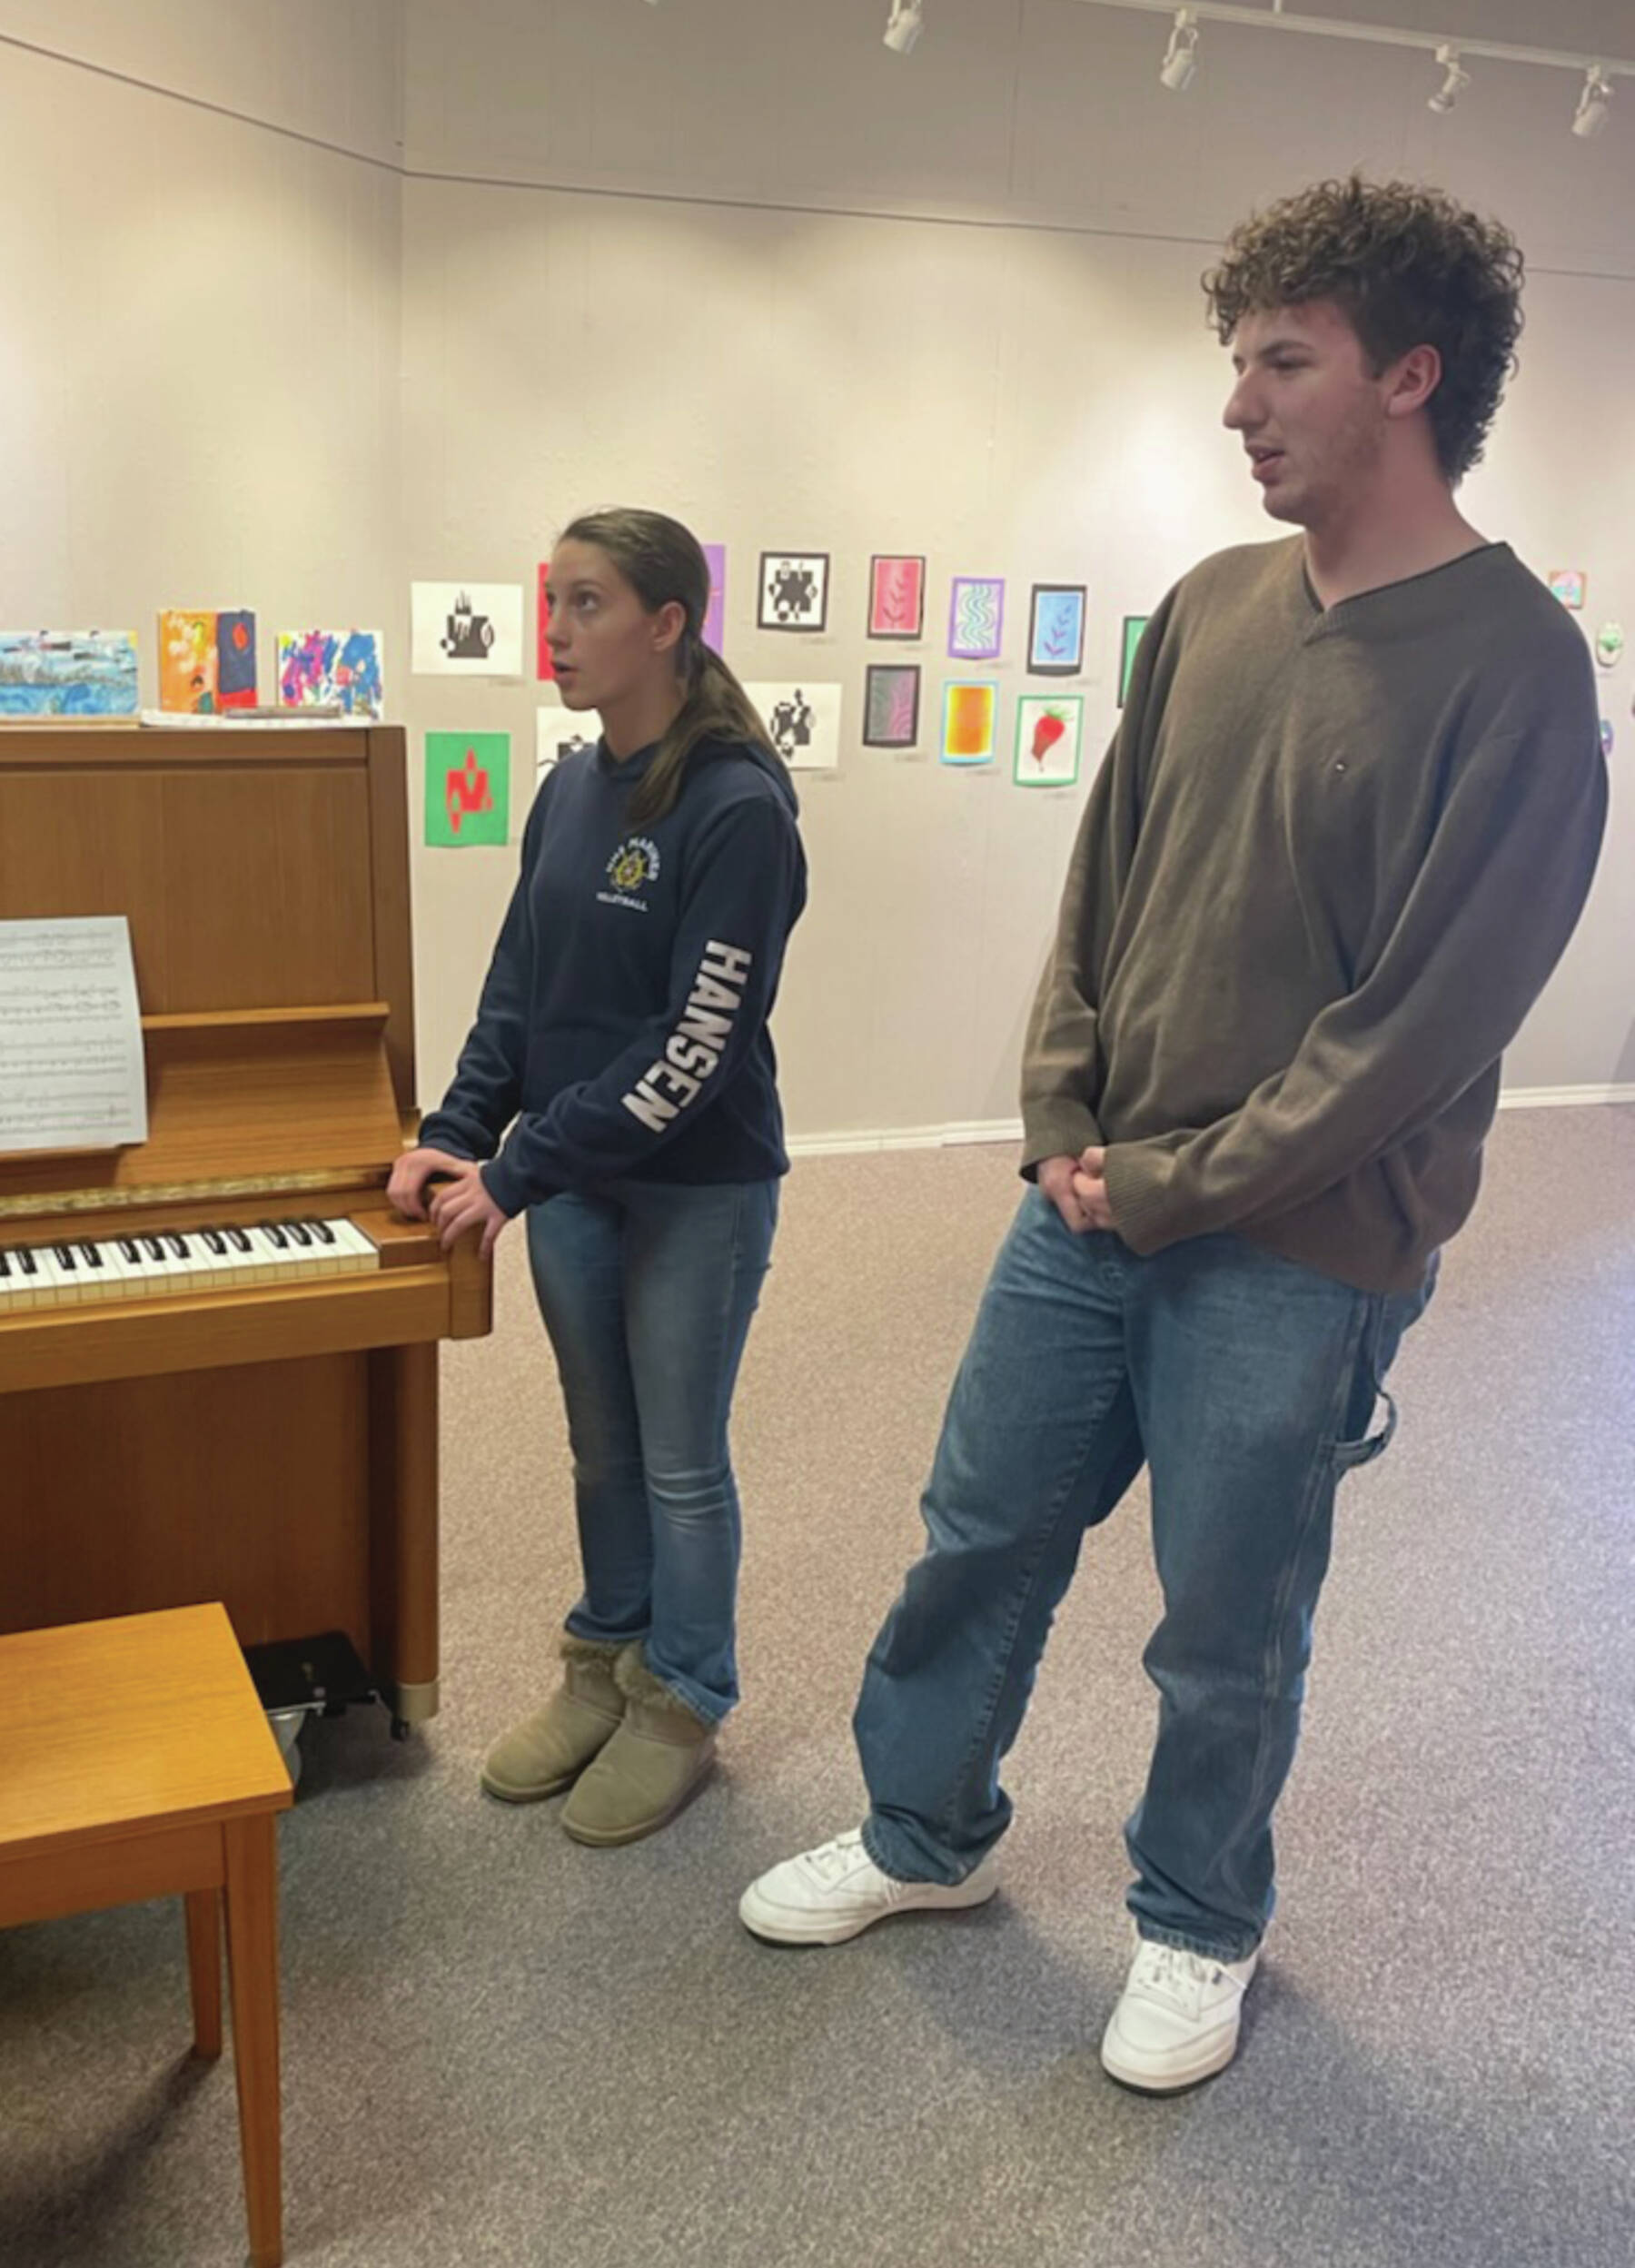 Photo by Emilie Springer
McKenzie Hansen and William Bradshaw rehearse a week before the single stage performance of Homer’s annual Jubilee youth talent show at Homer Council on the Arts.